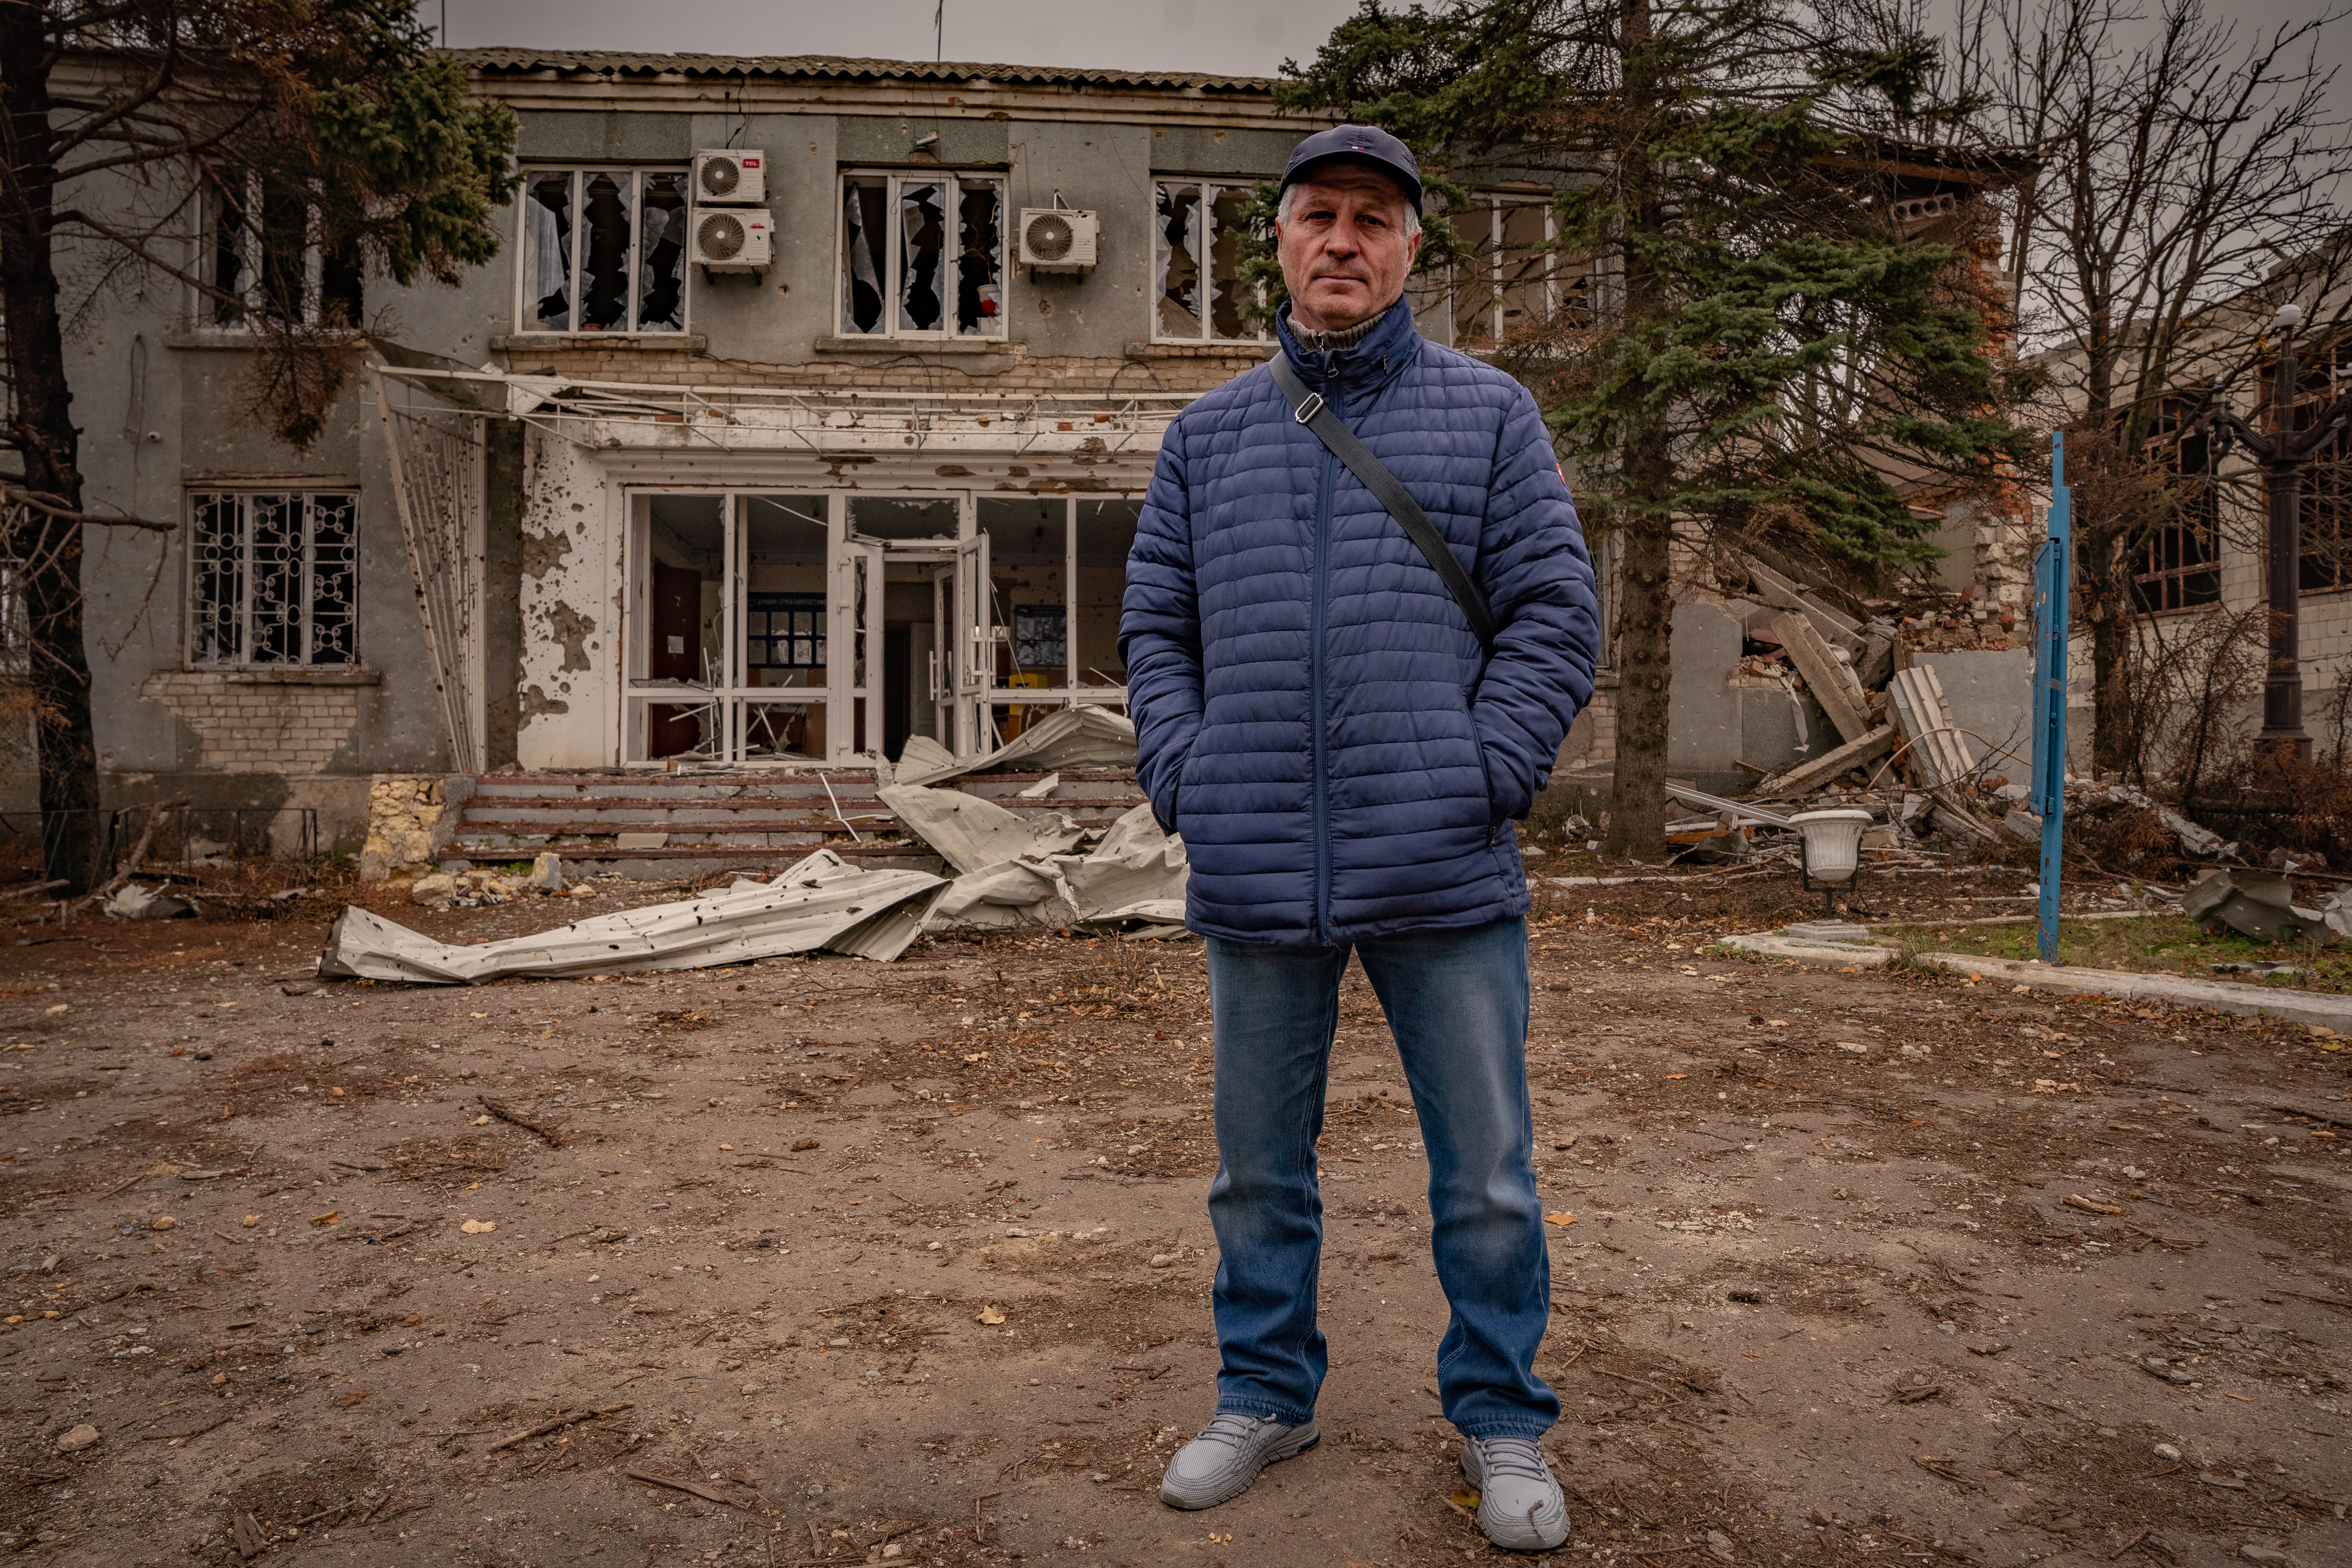 The mayor of Osokorivka stands outside the destroyed remains of his offices